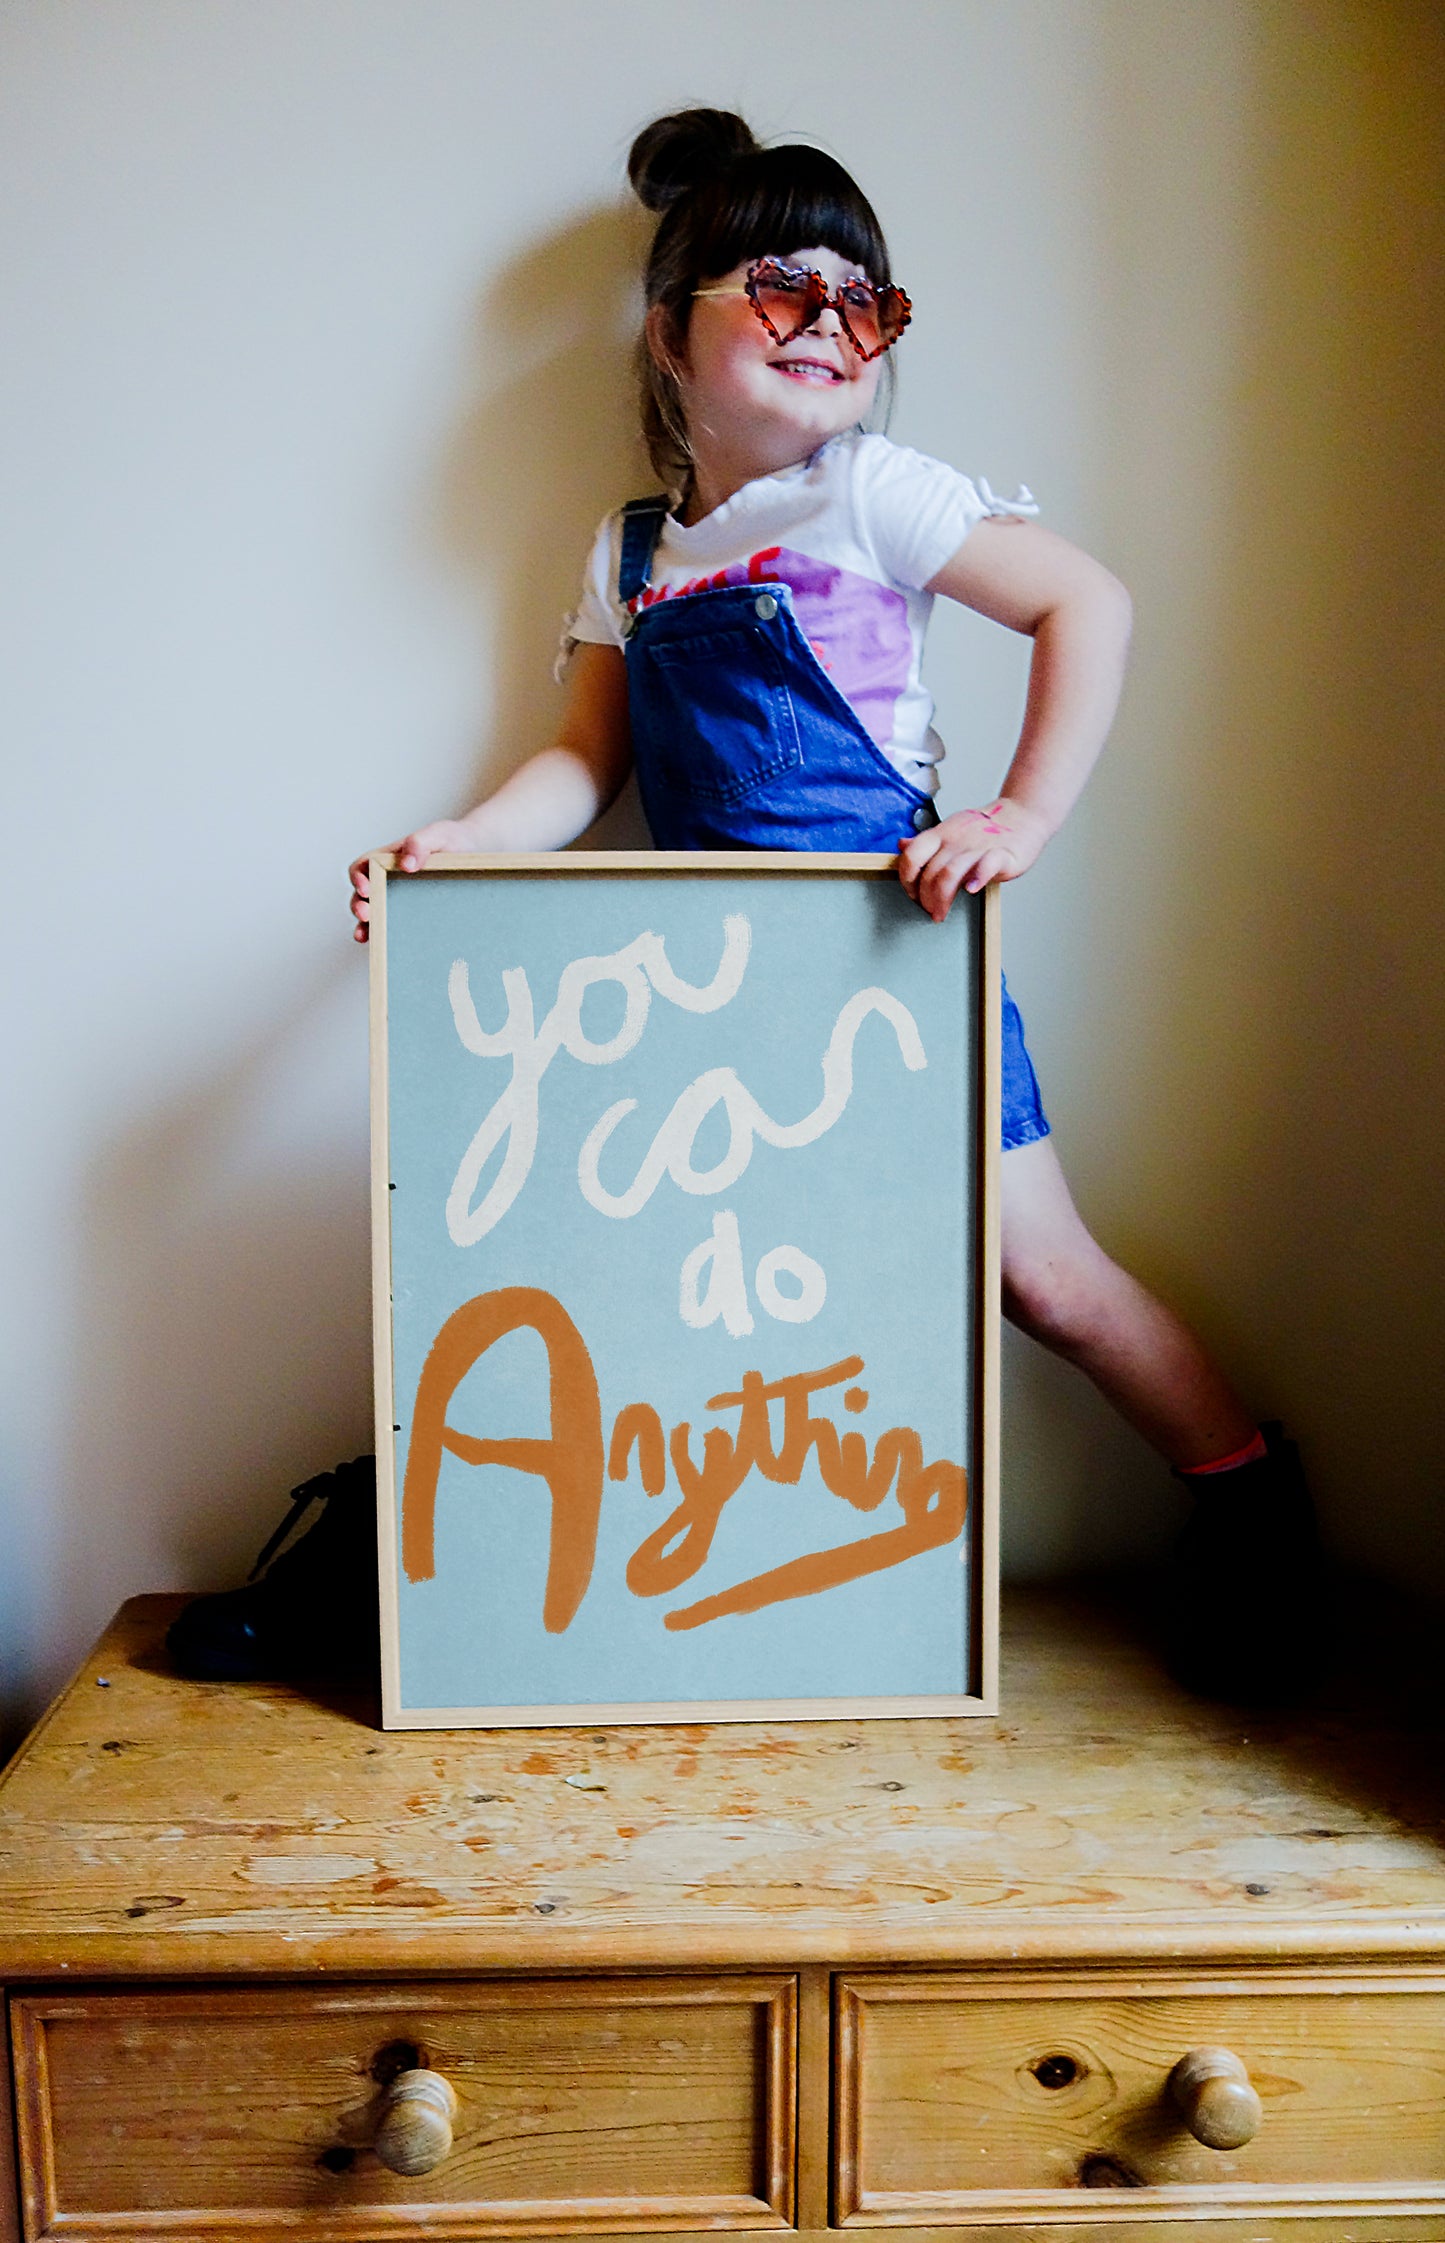 You Can Do Anything Print - Blue, White, Brown Framed Print